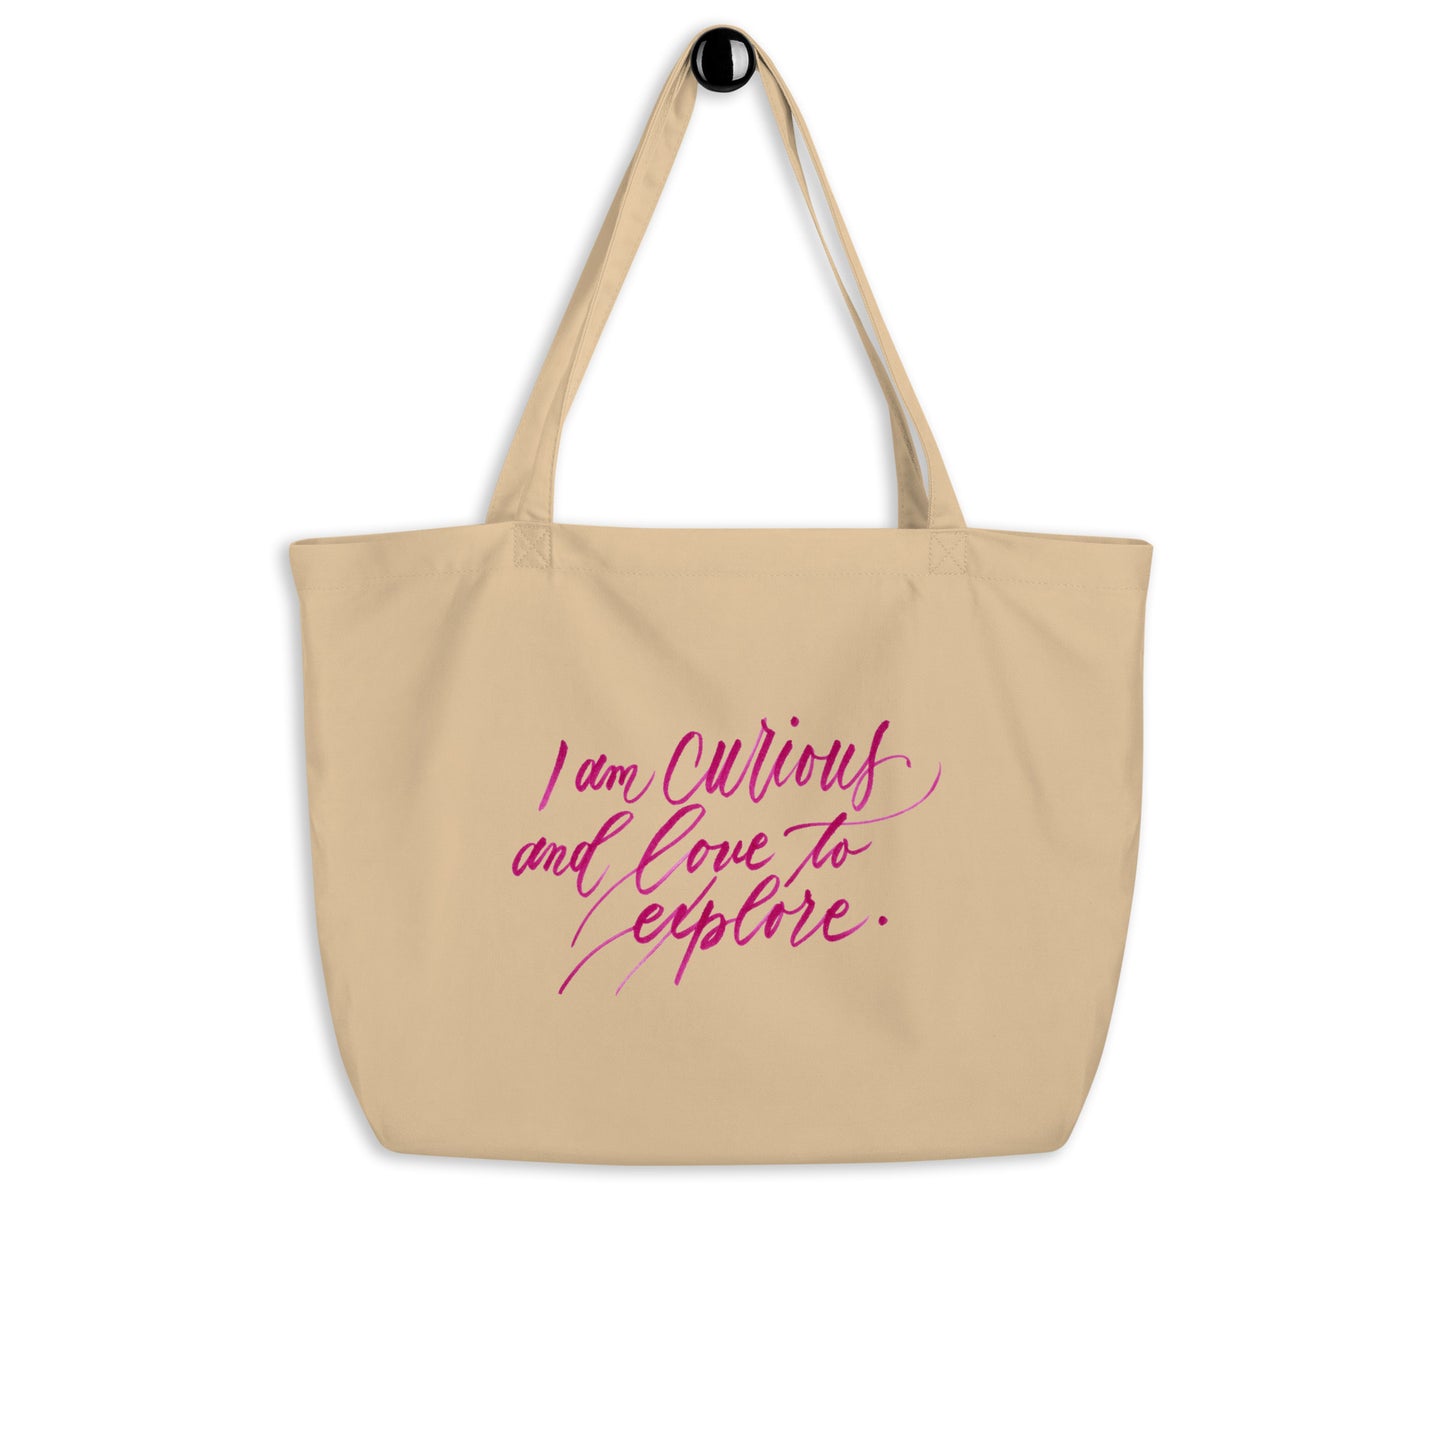 Explorer's Tote - "I am curious..." Calligraphy Printed on Certified Organic Cotton Canvas LARGE Tote Bag - I am Empowered #02